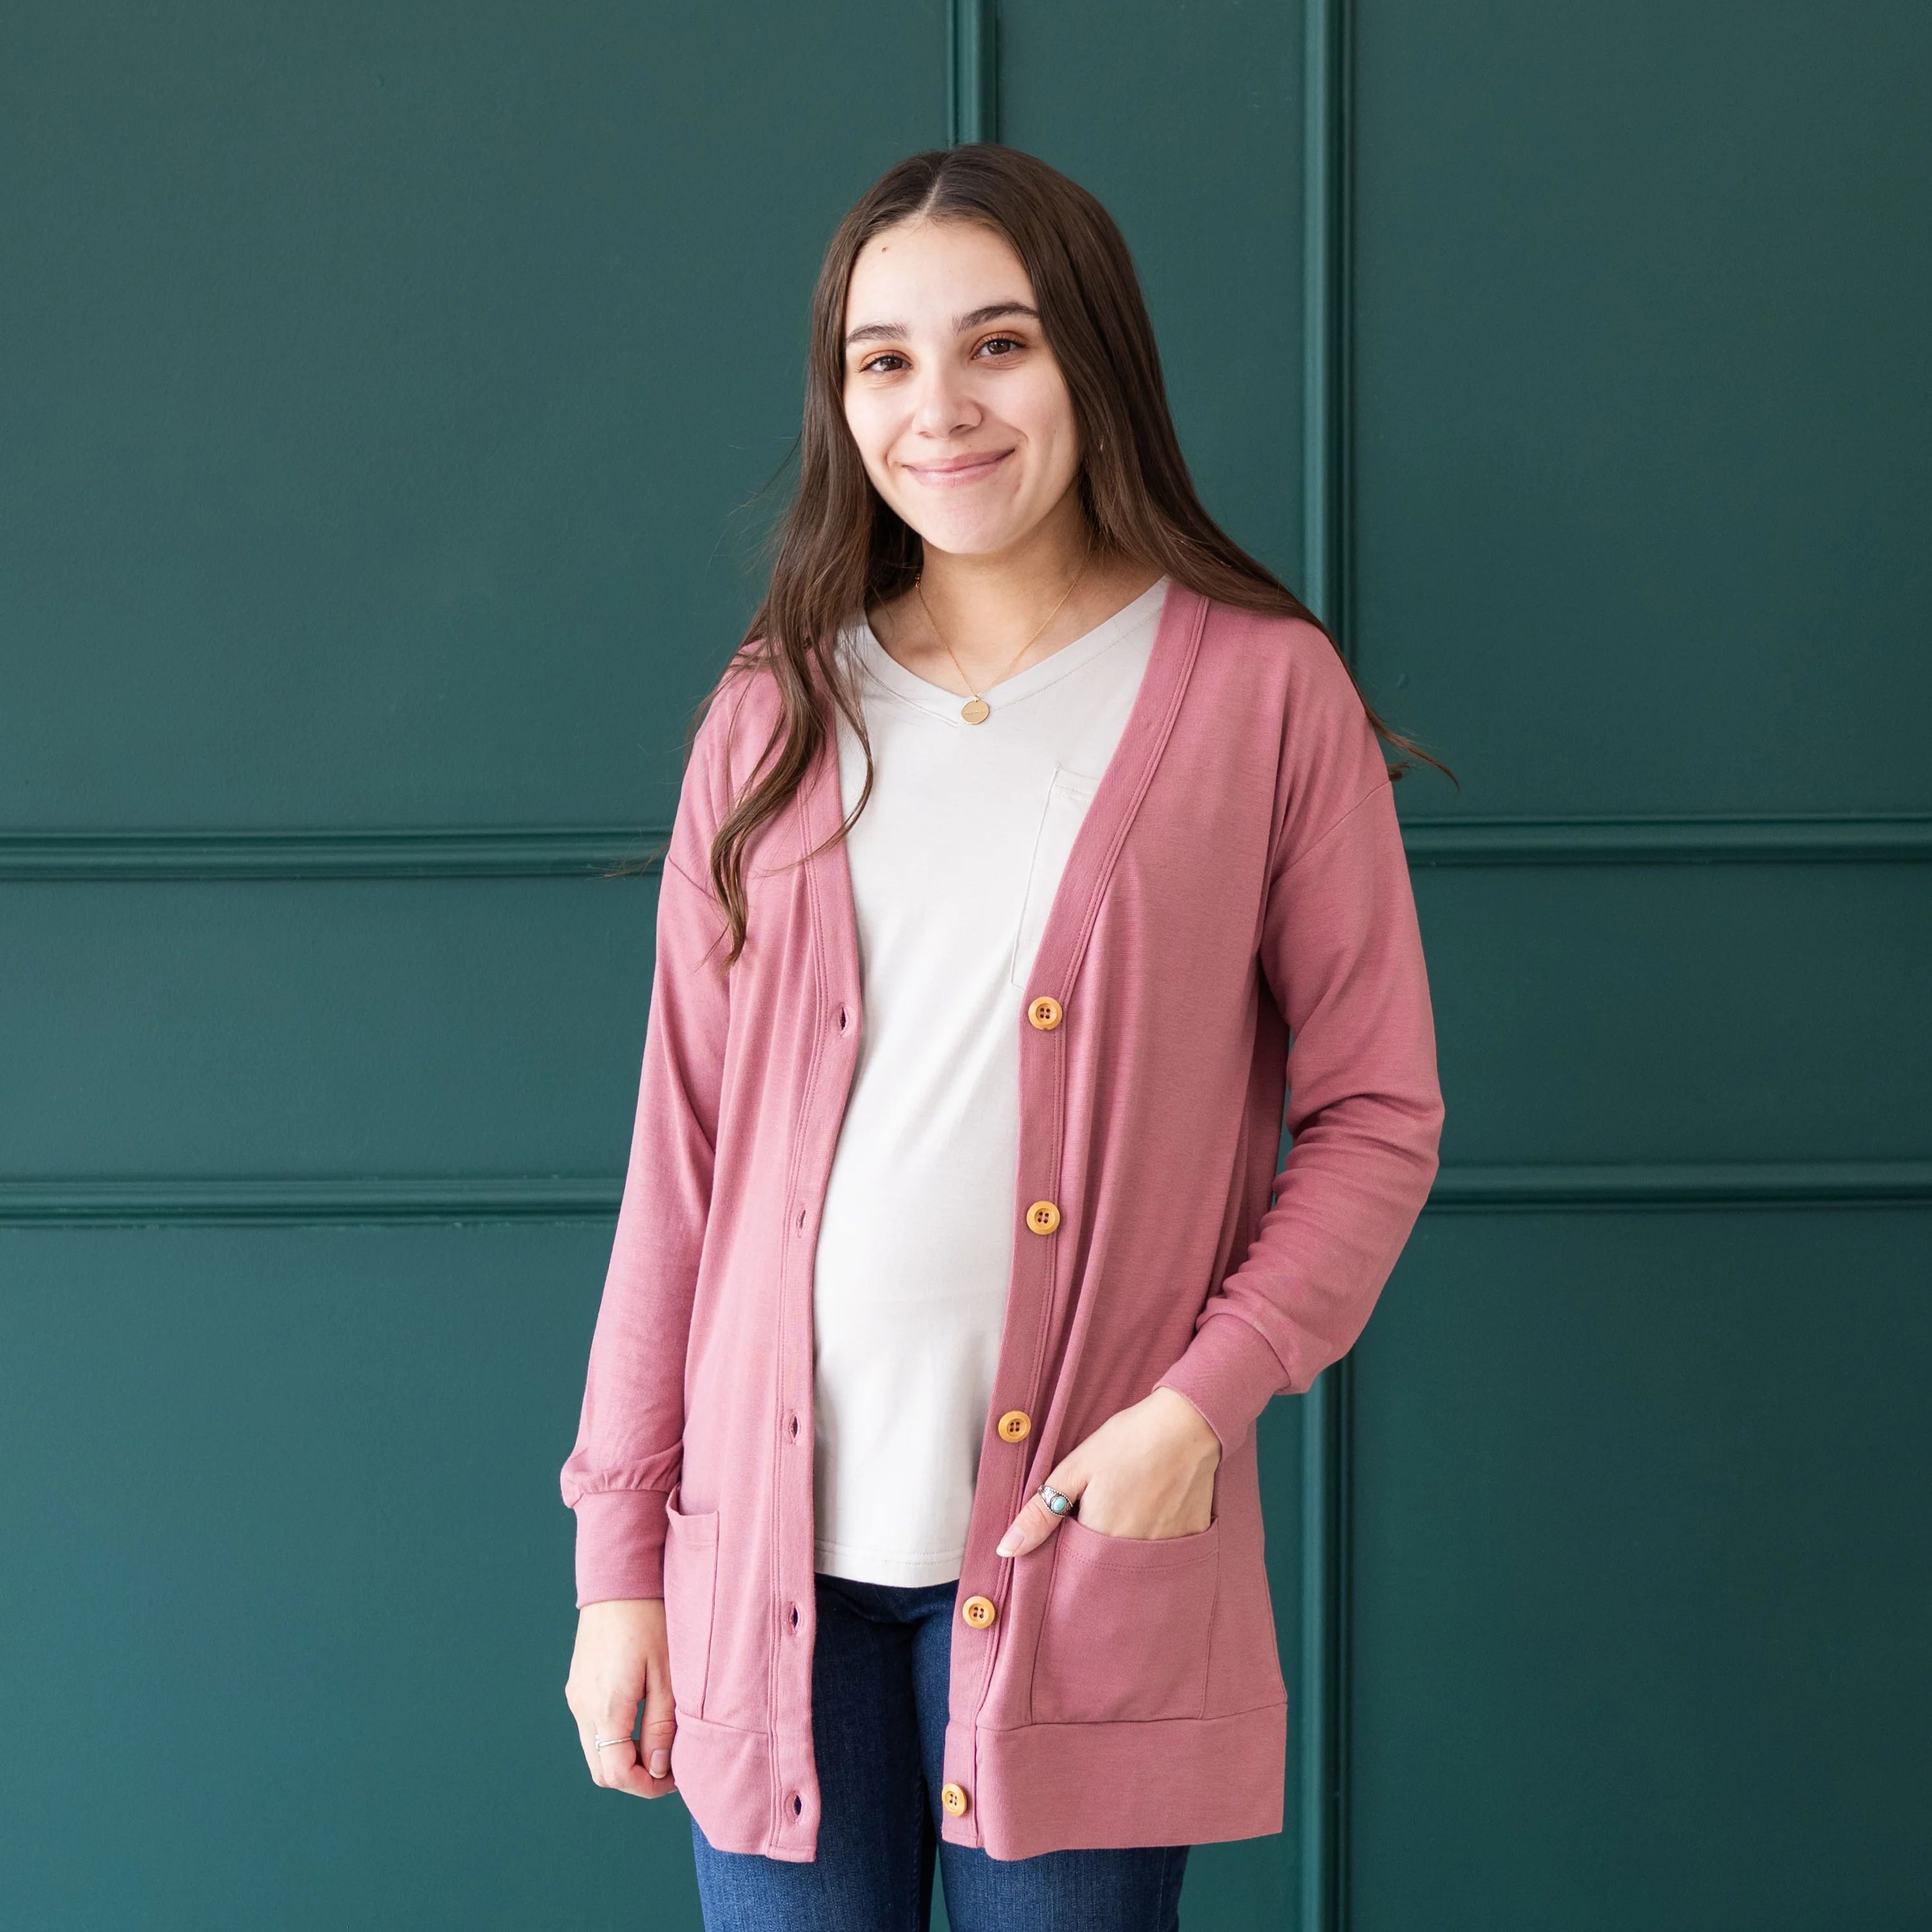 Bamboo Jersey Adult Cardigan in Dusty Rose | Kyte BABY